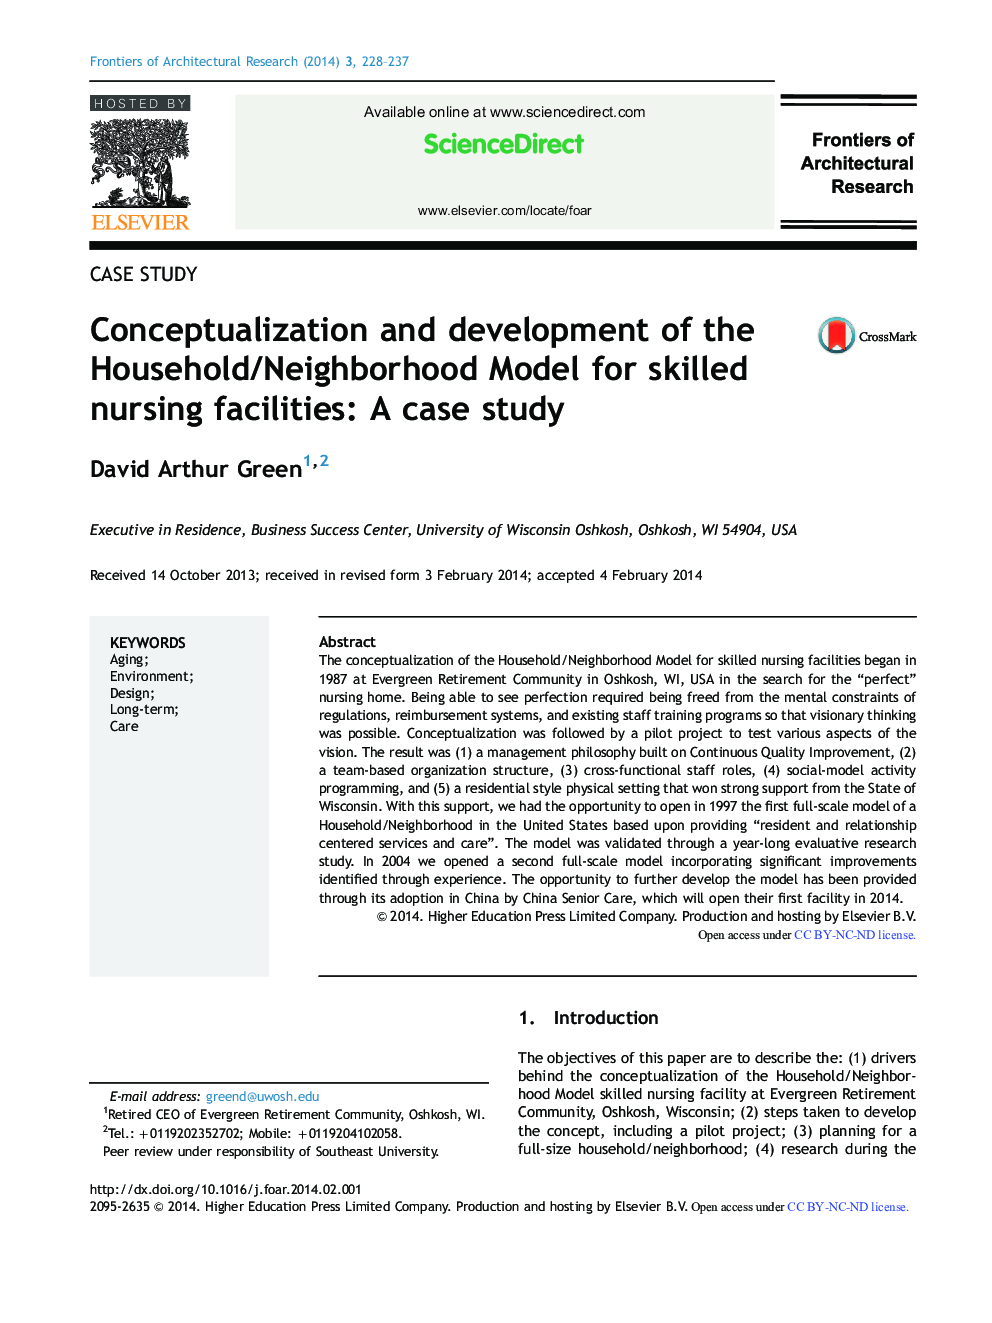 Conceptualization and development of the Household/Neighborhood Model for skilled nursing facilities: A case study 